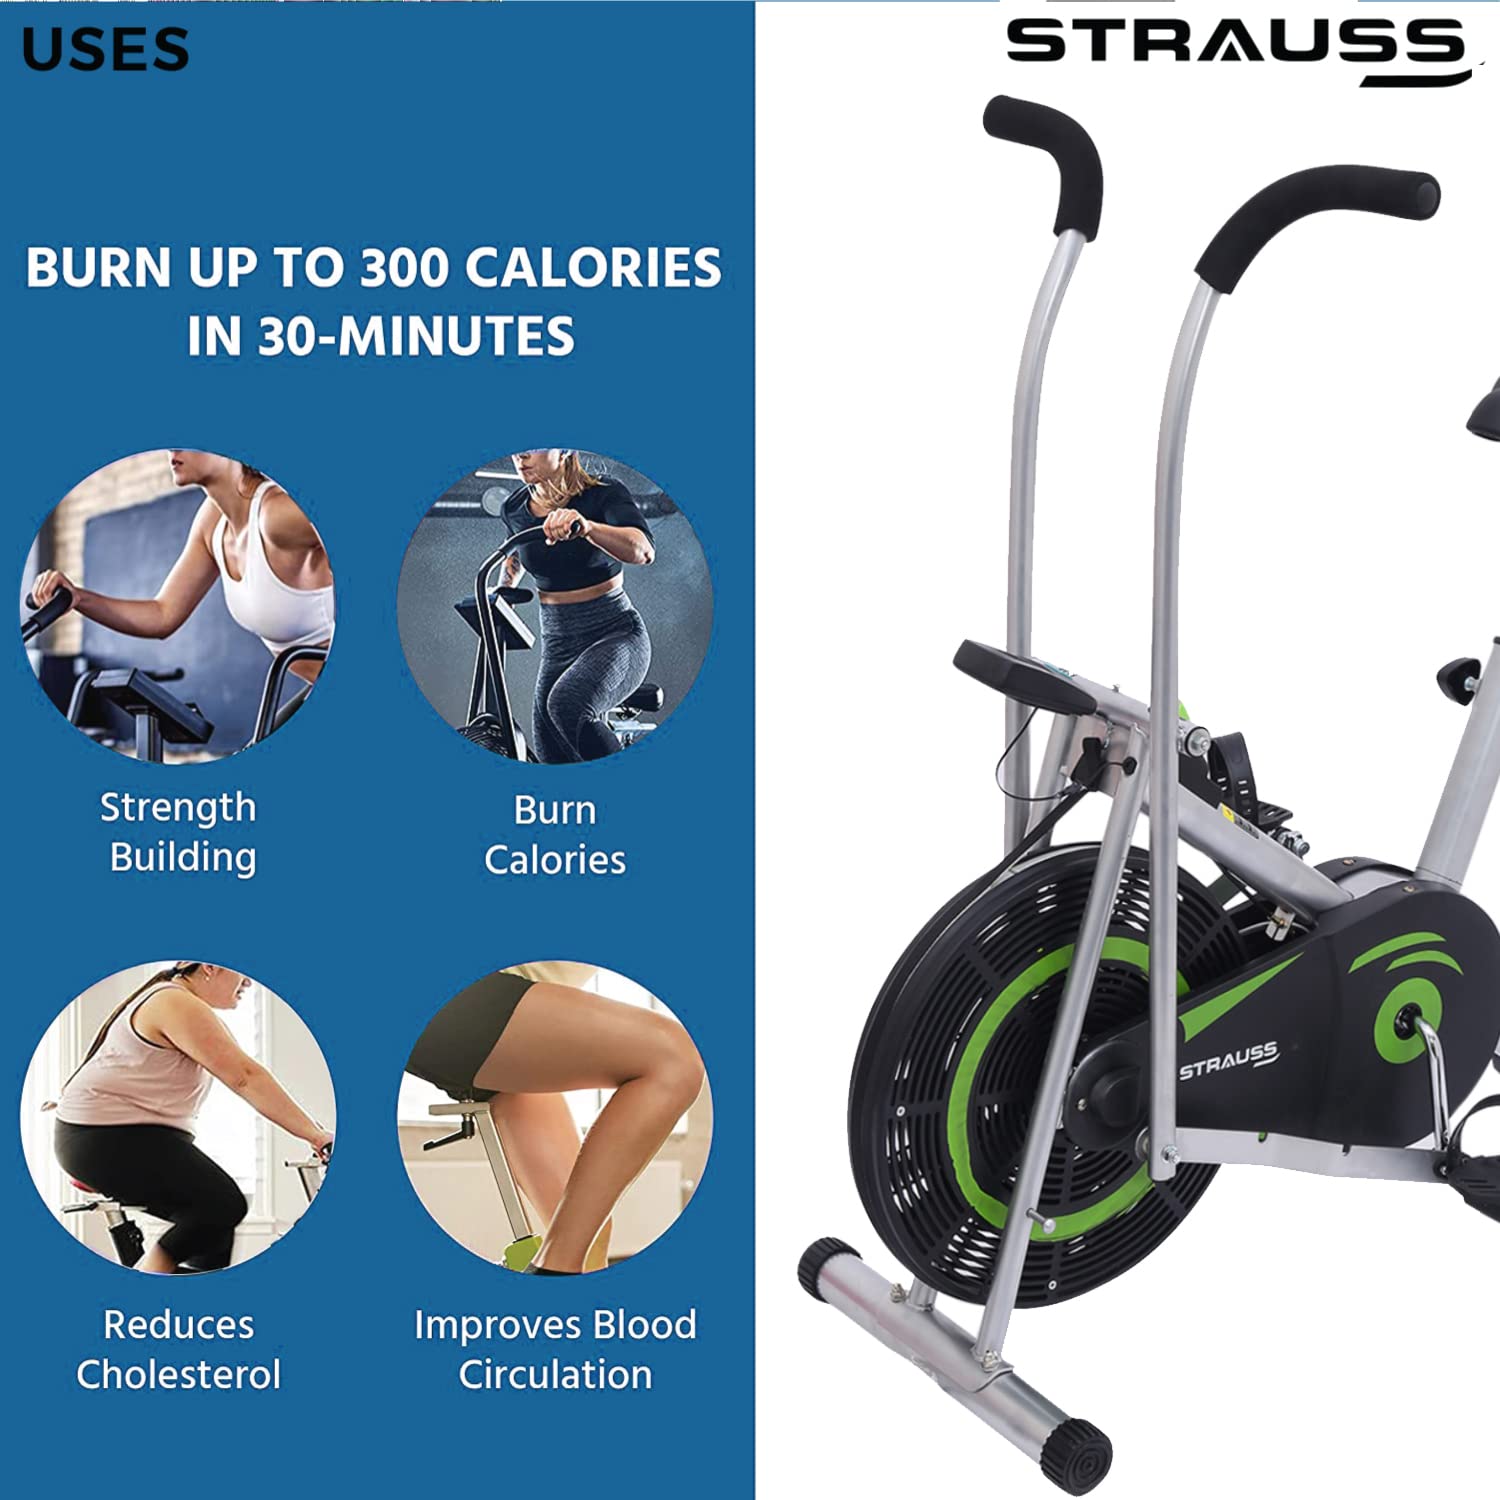 Strauss StayFit Exercise Bike, Green